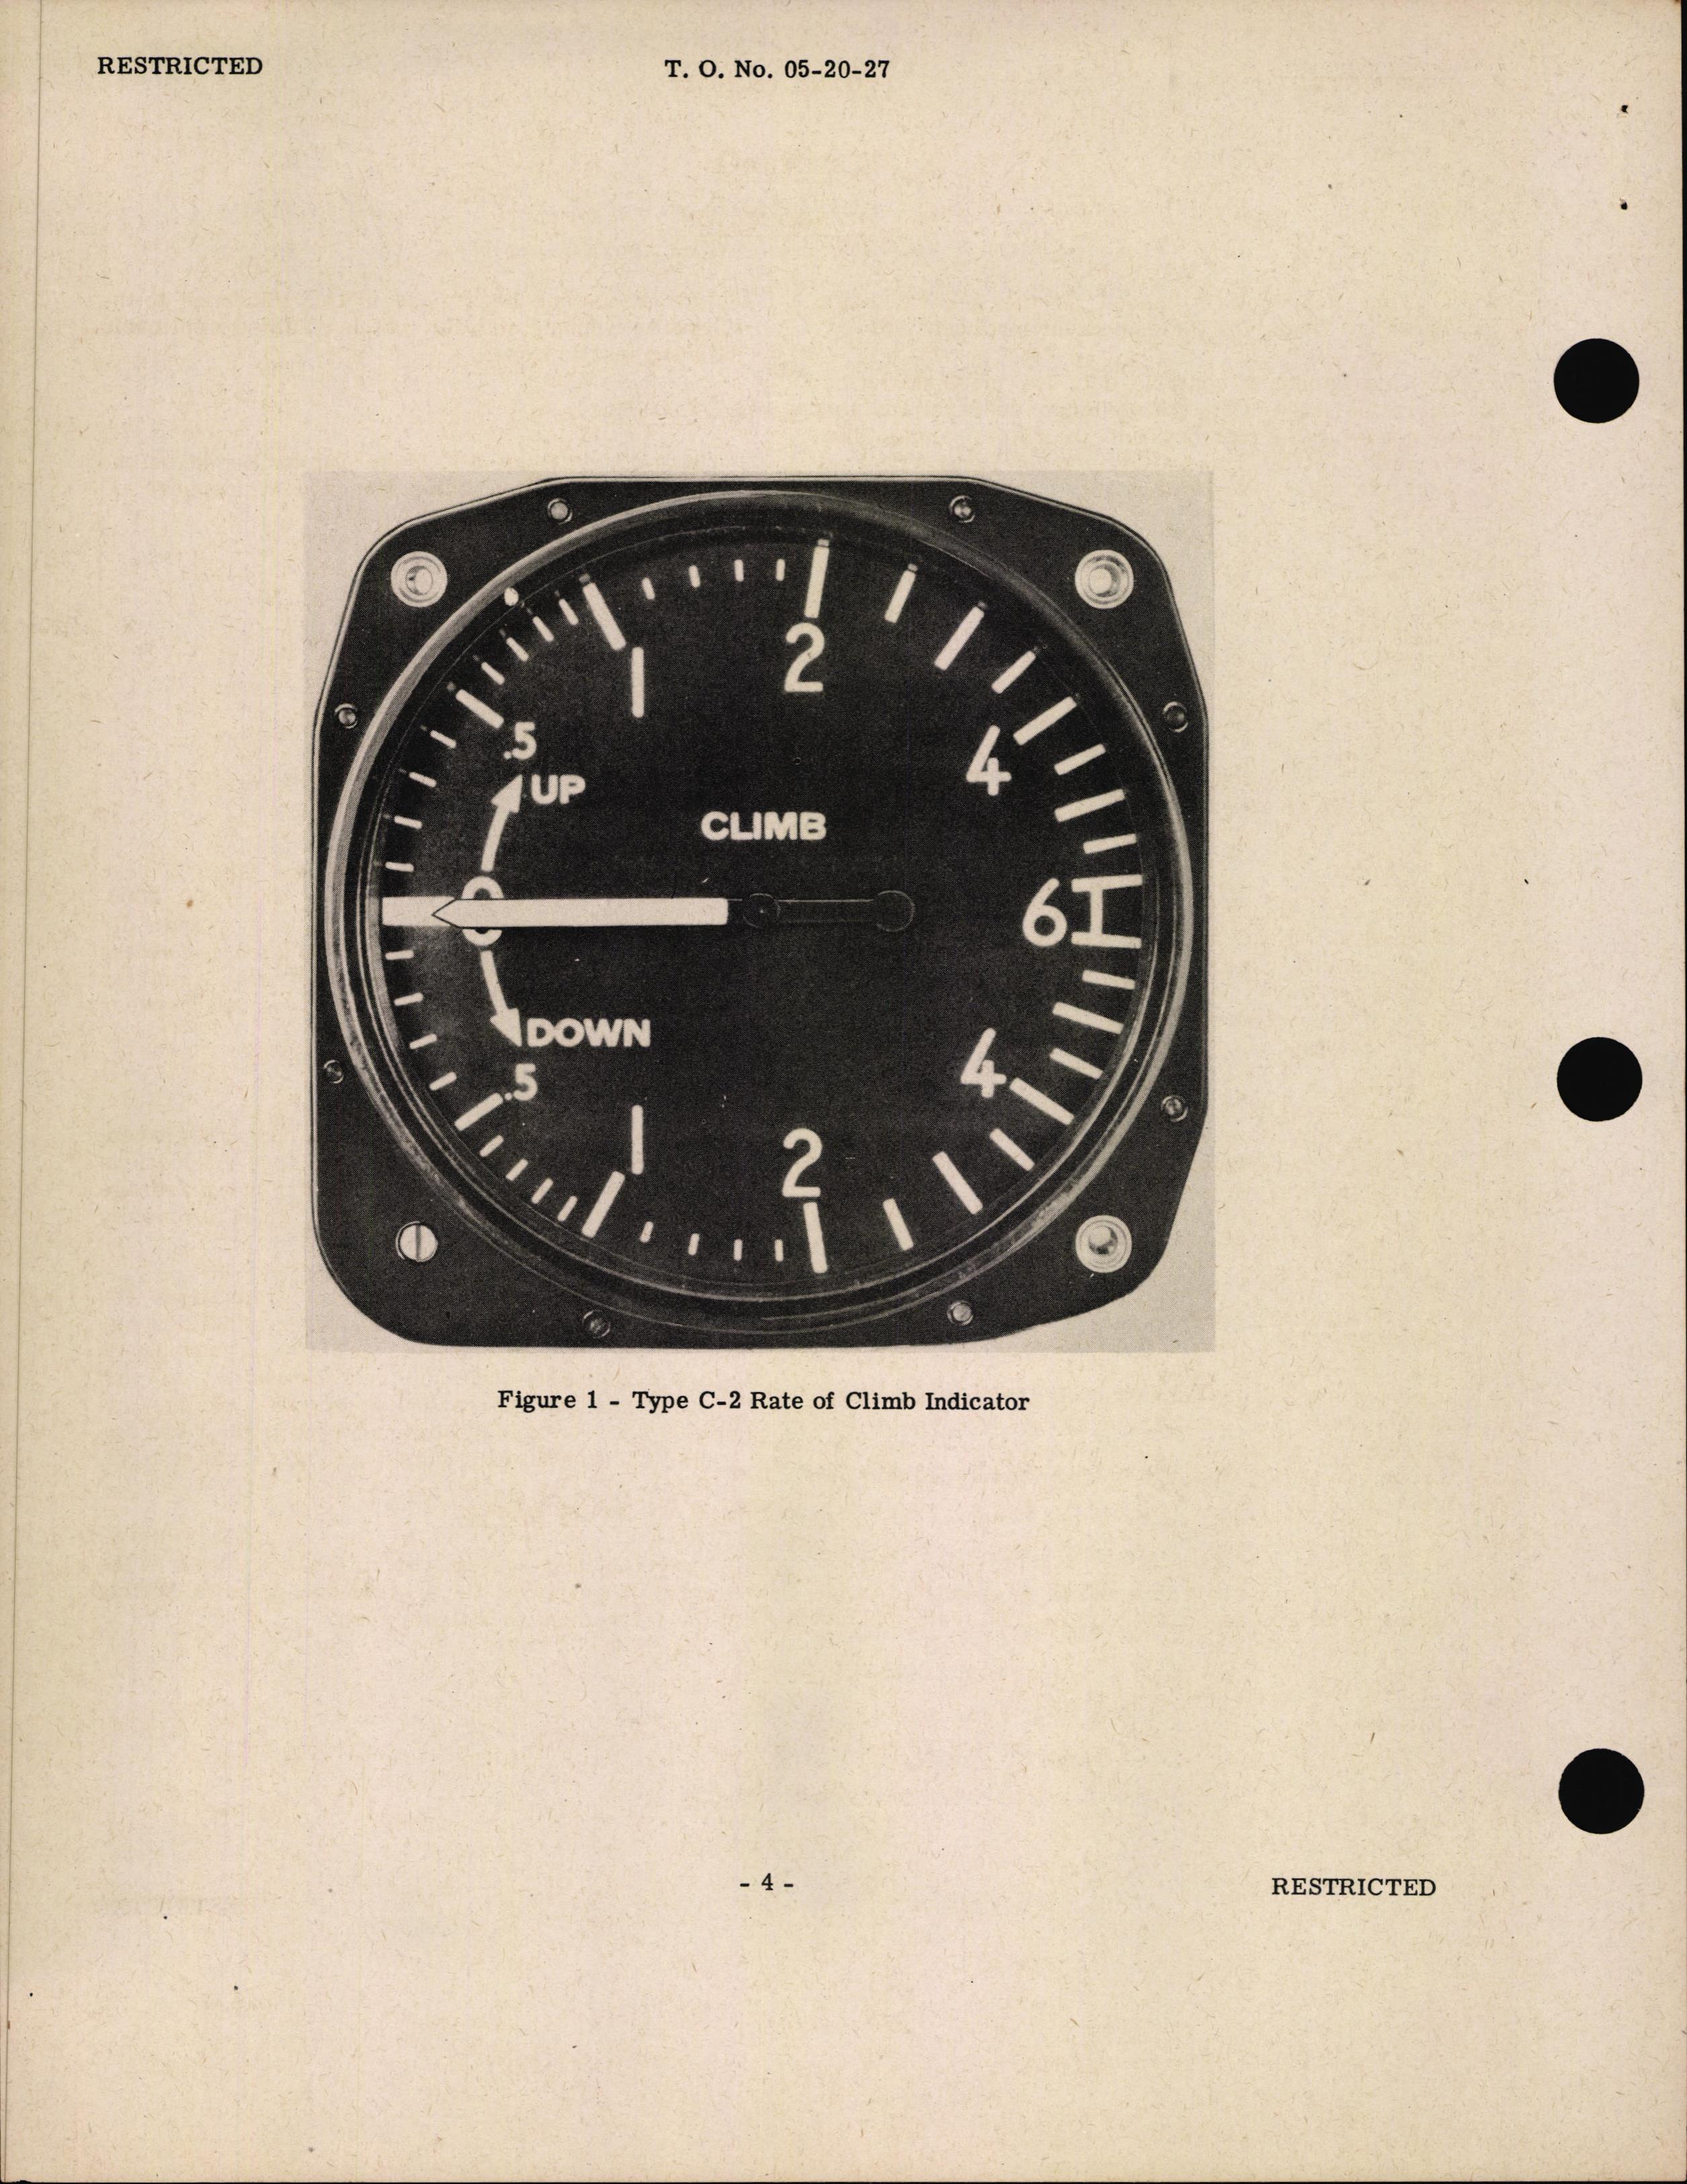 Sample page 6 from AirCorps Library document: Handbook of Instructions with Parts Catalog for Type C-2 Rate of Climb Indicator